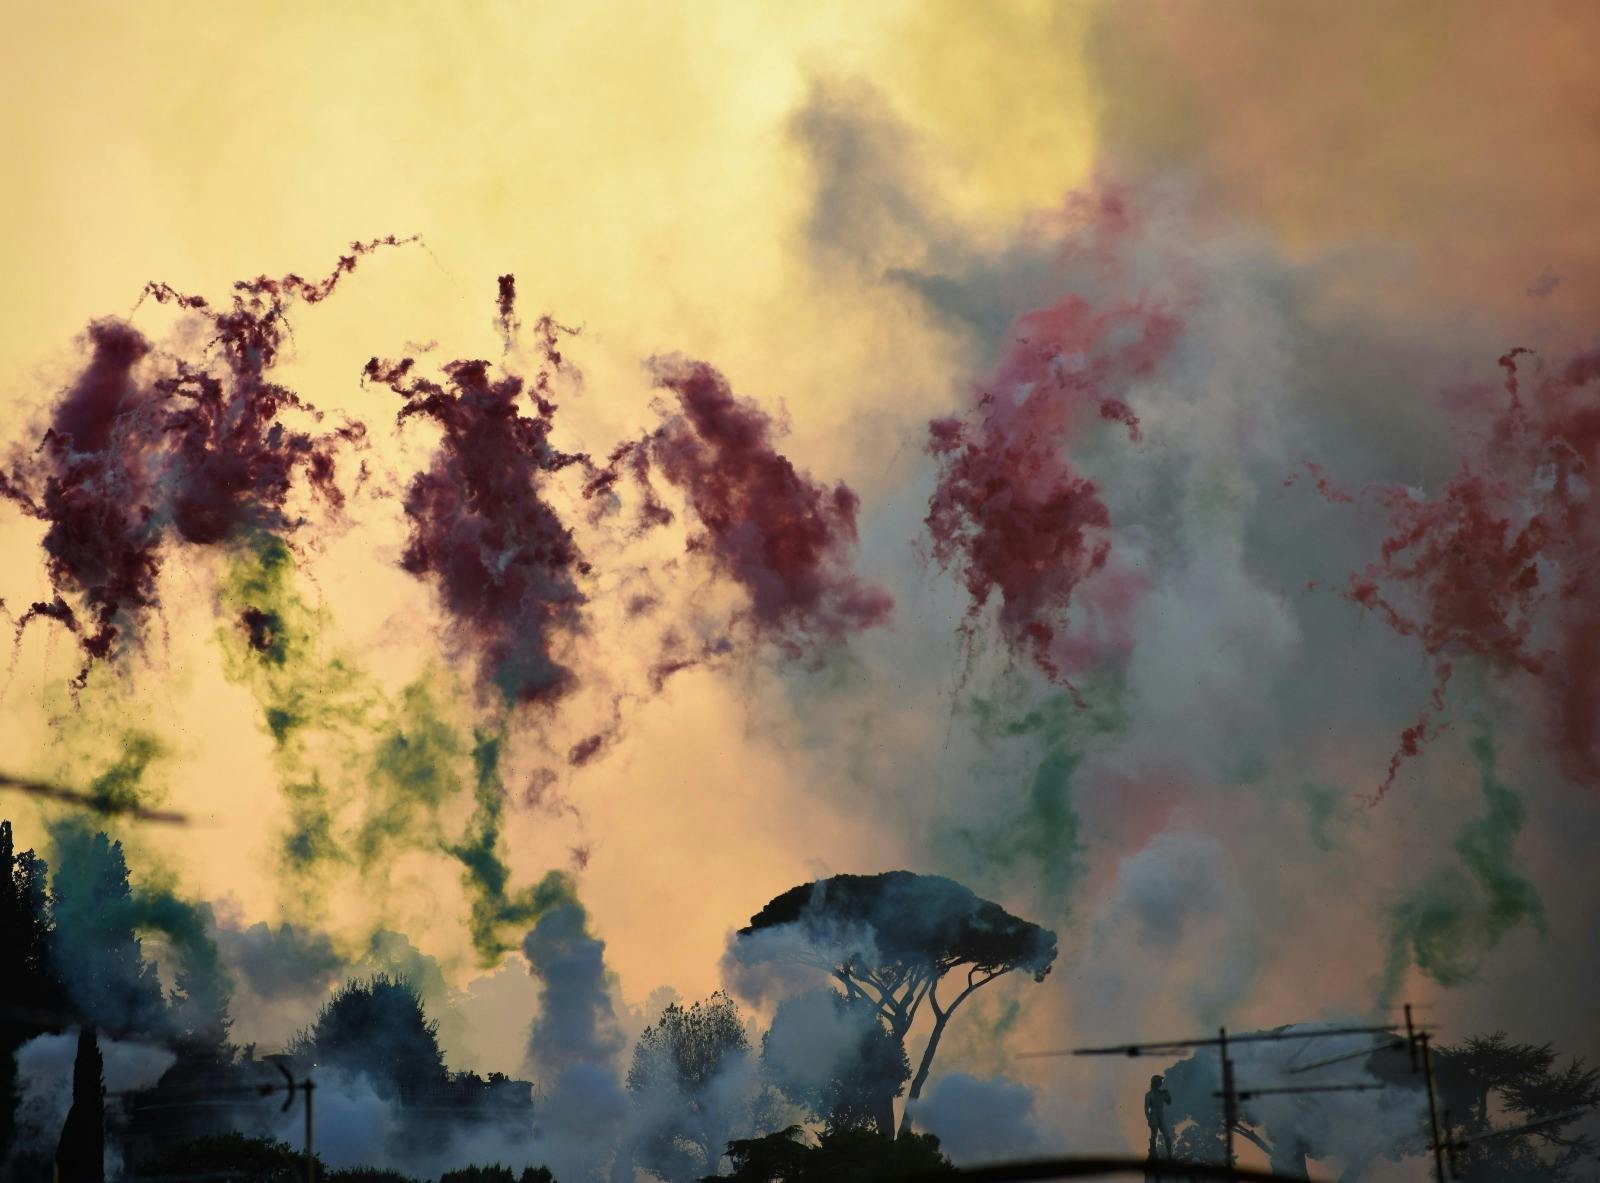 City of Flowers in the Sky. Cai Guo-Qiang creates a daytime explosion event for the city of Florence